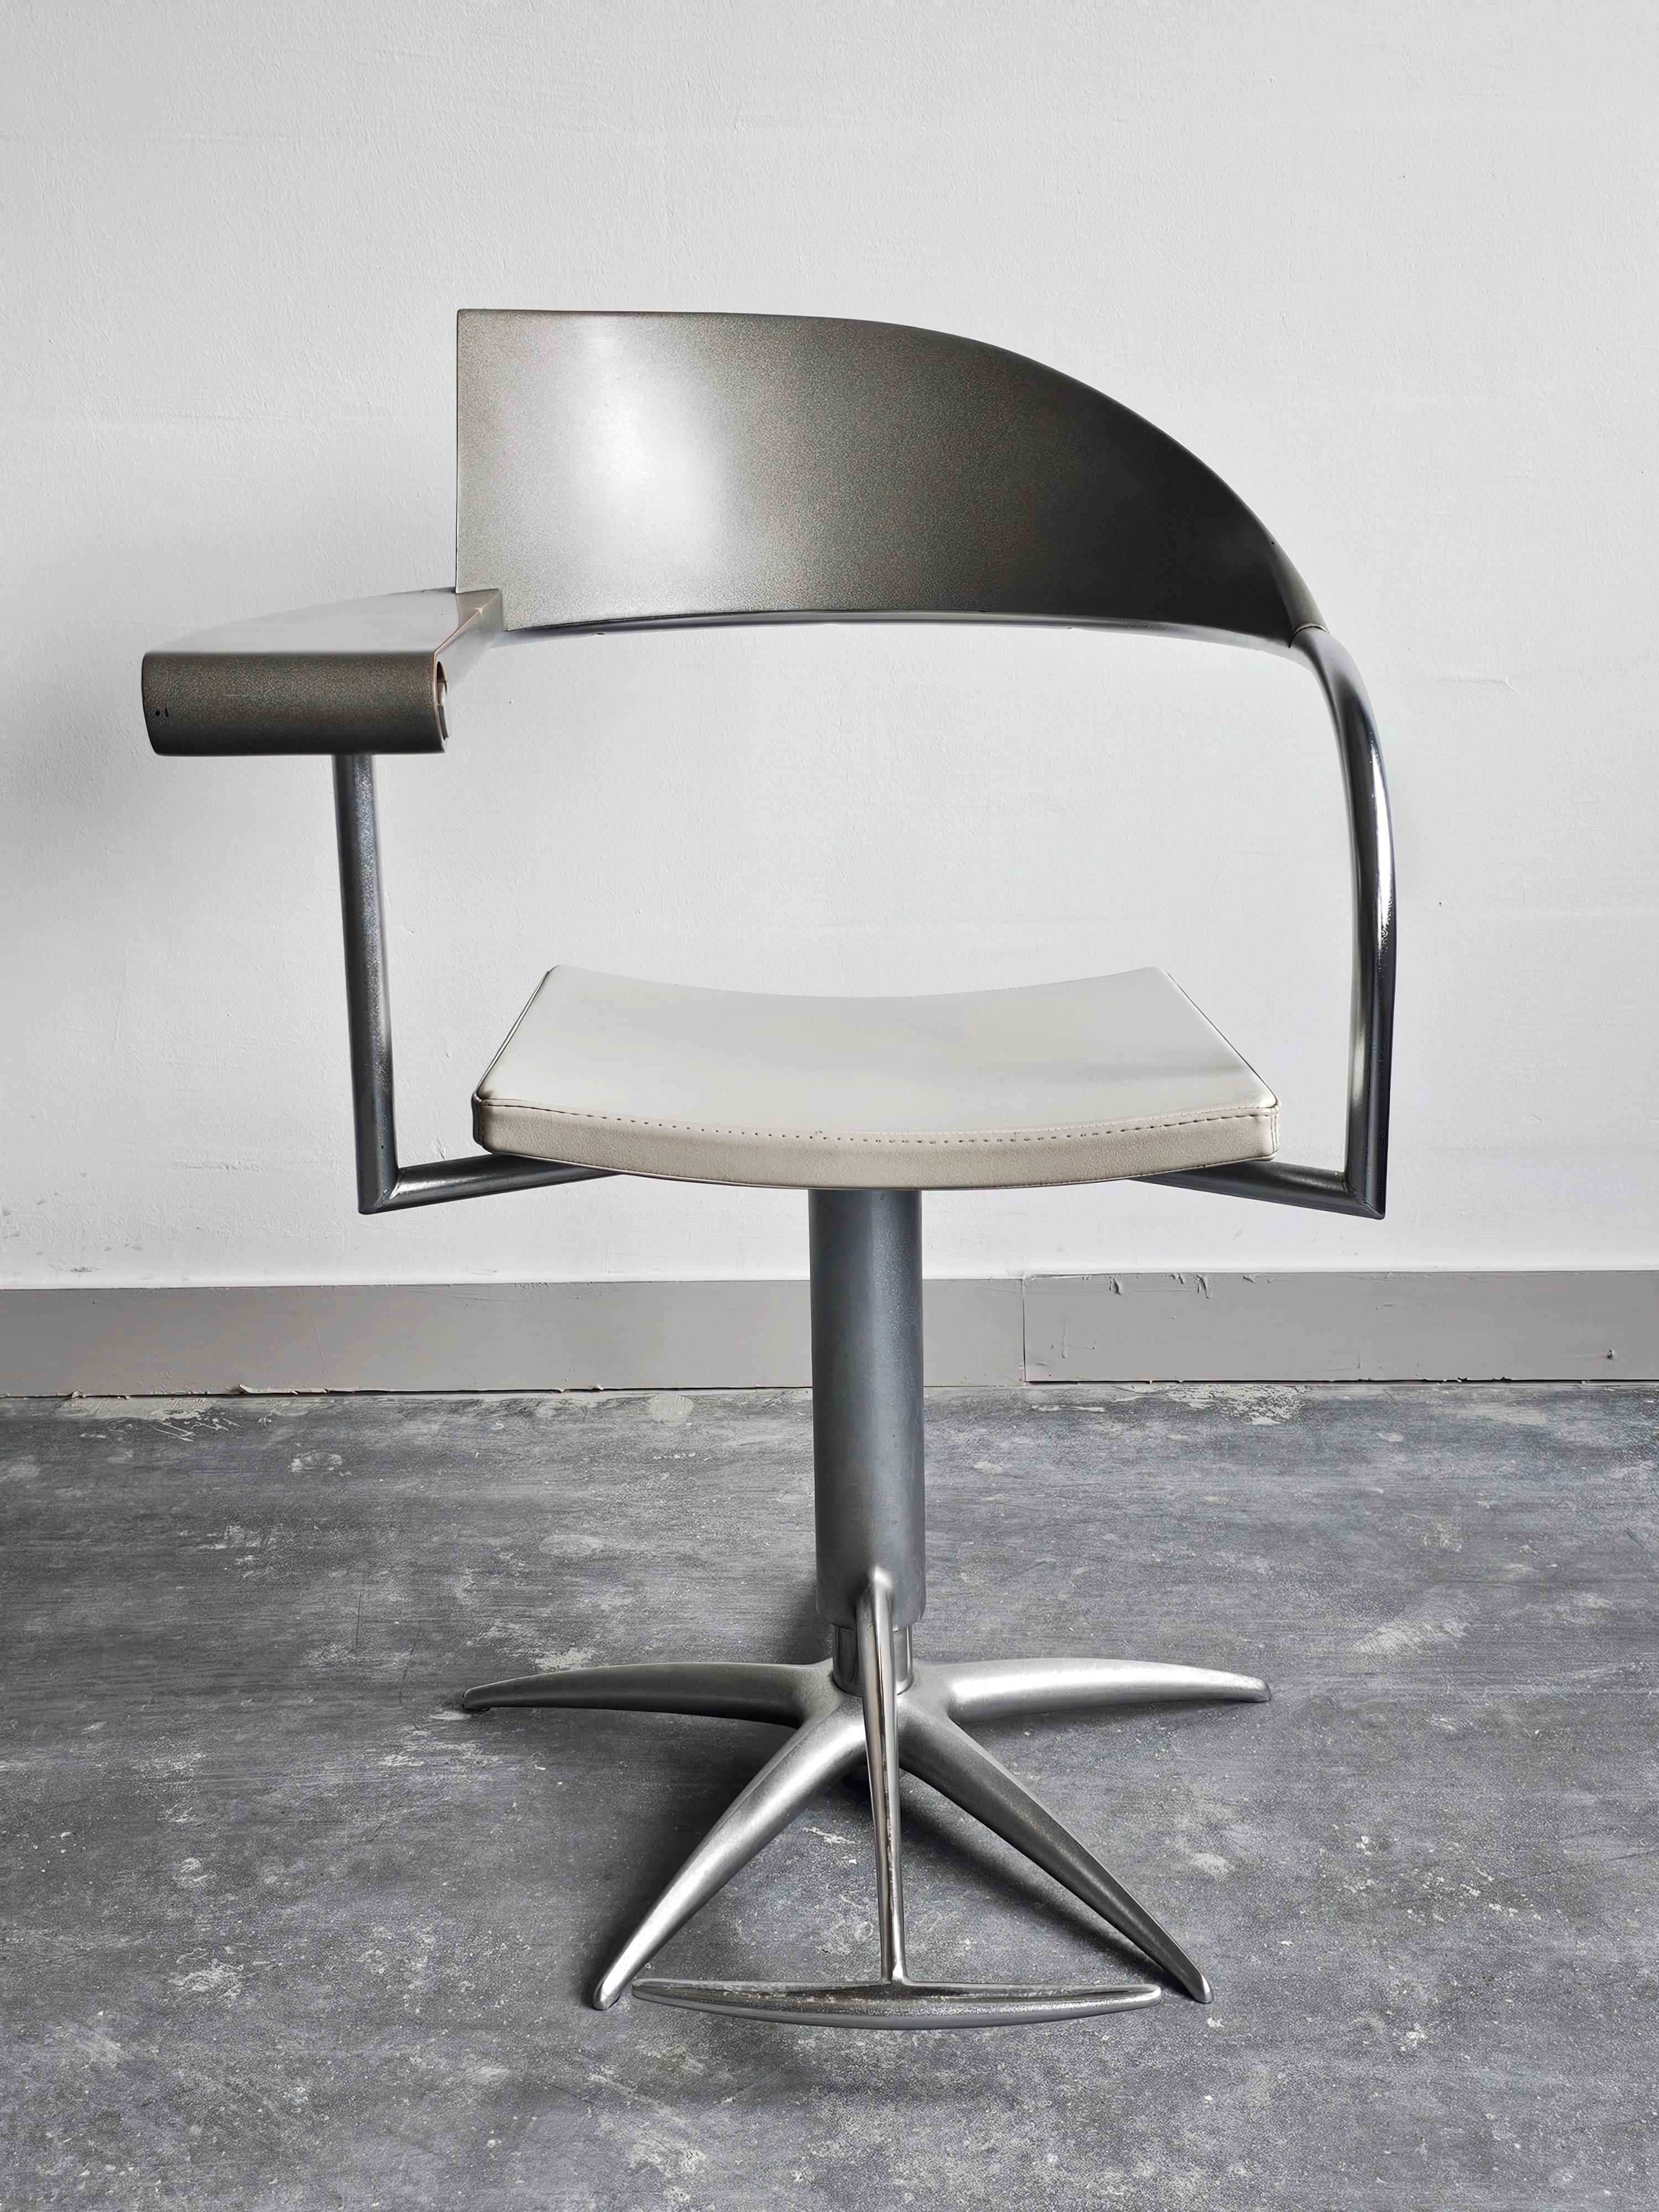 In this listing you will find 4 exceptionally rare swivel barber chairs, called Techno chairs, designed by Philippe Starck for L'Oreal.

These chairs represent the peek of postmodern design with astonishing lines and exquisite craftsmanship.  Each